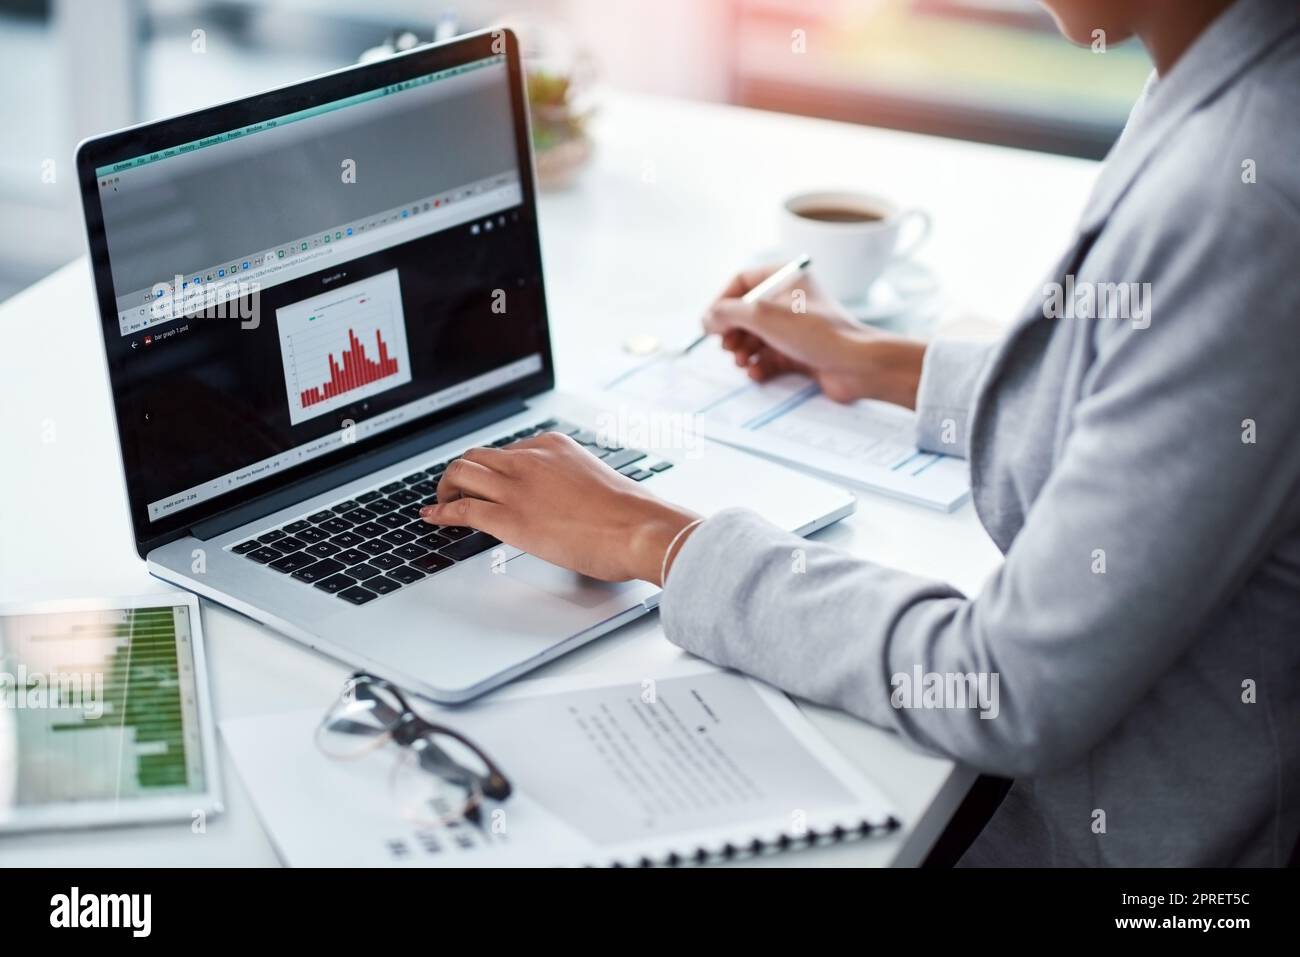 Female project manager typing on laptop looking at charts, analyzing statistics. Financial data analyst or business woman looking at KPI bar graph, measuring company strategy success and performance. Stock Photo